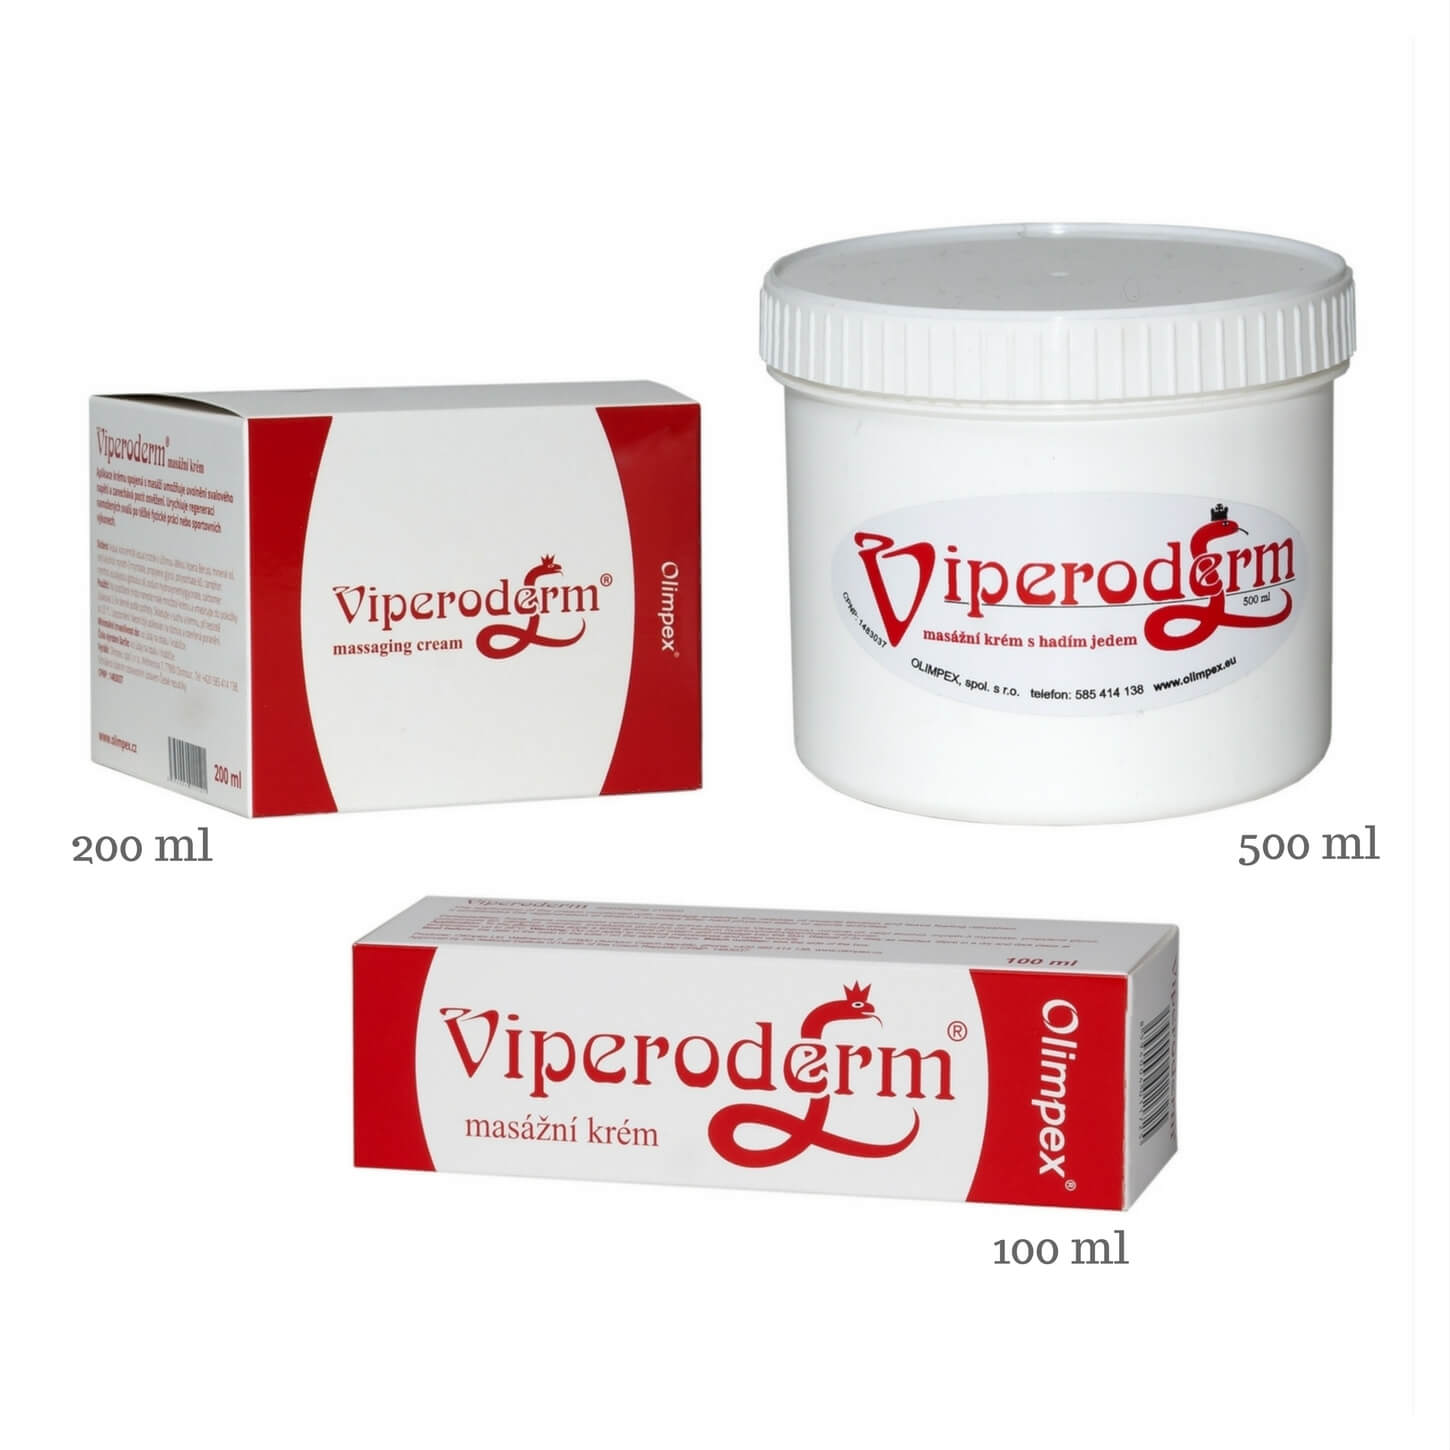 Olimpex s. r. o. Viperoderm 200 ml